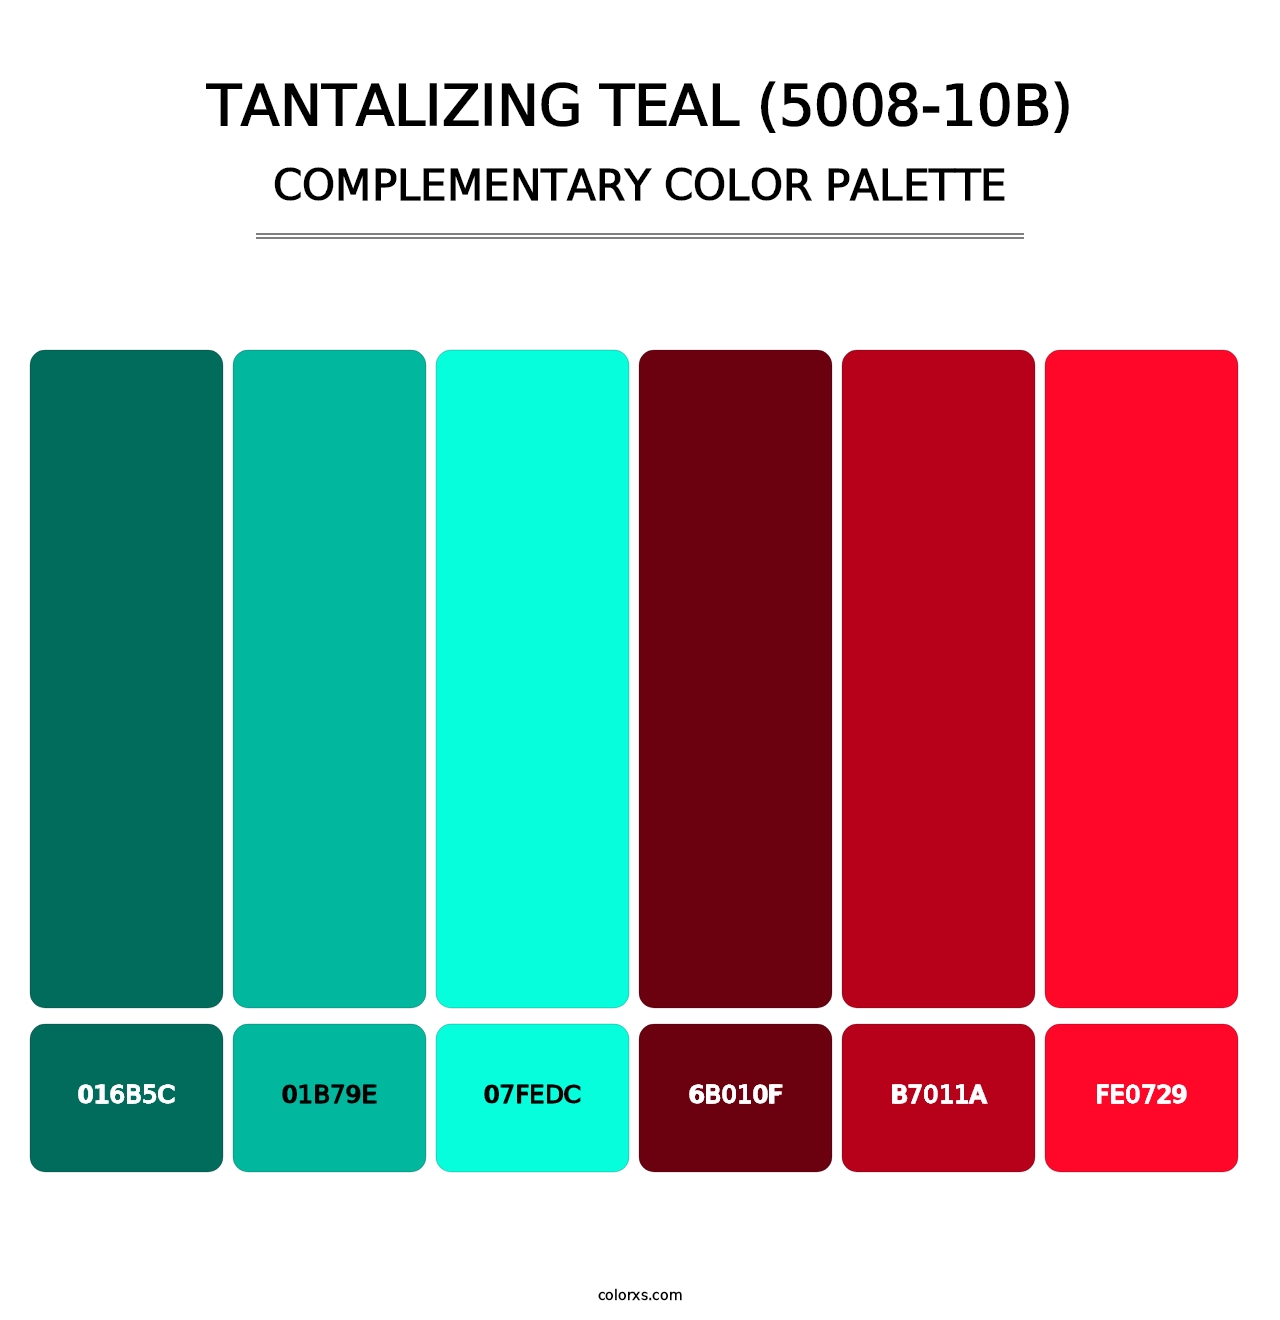 Tantalizing Teal (5008-10B) - Complementary Color Palette